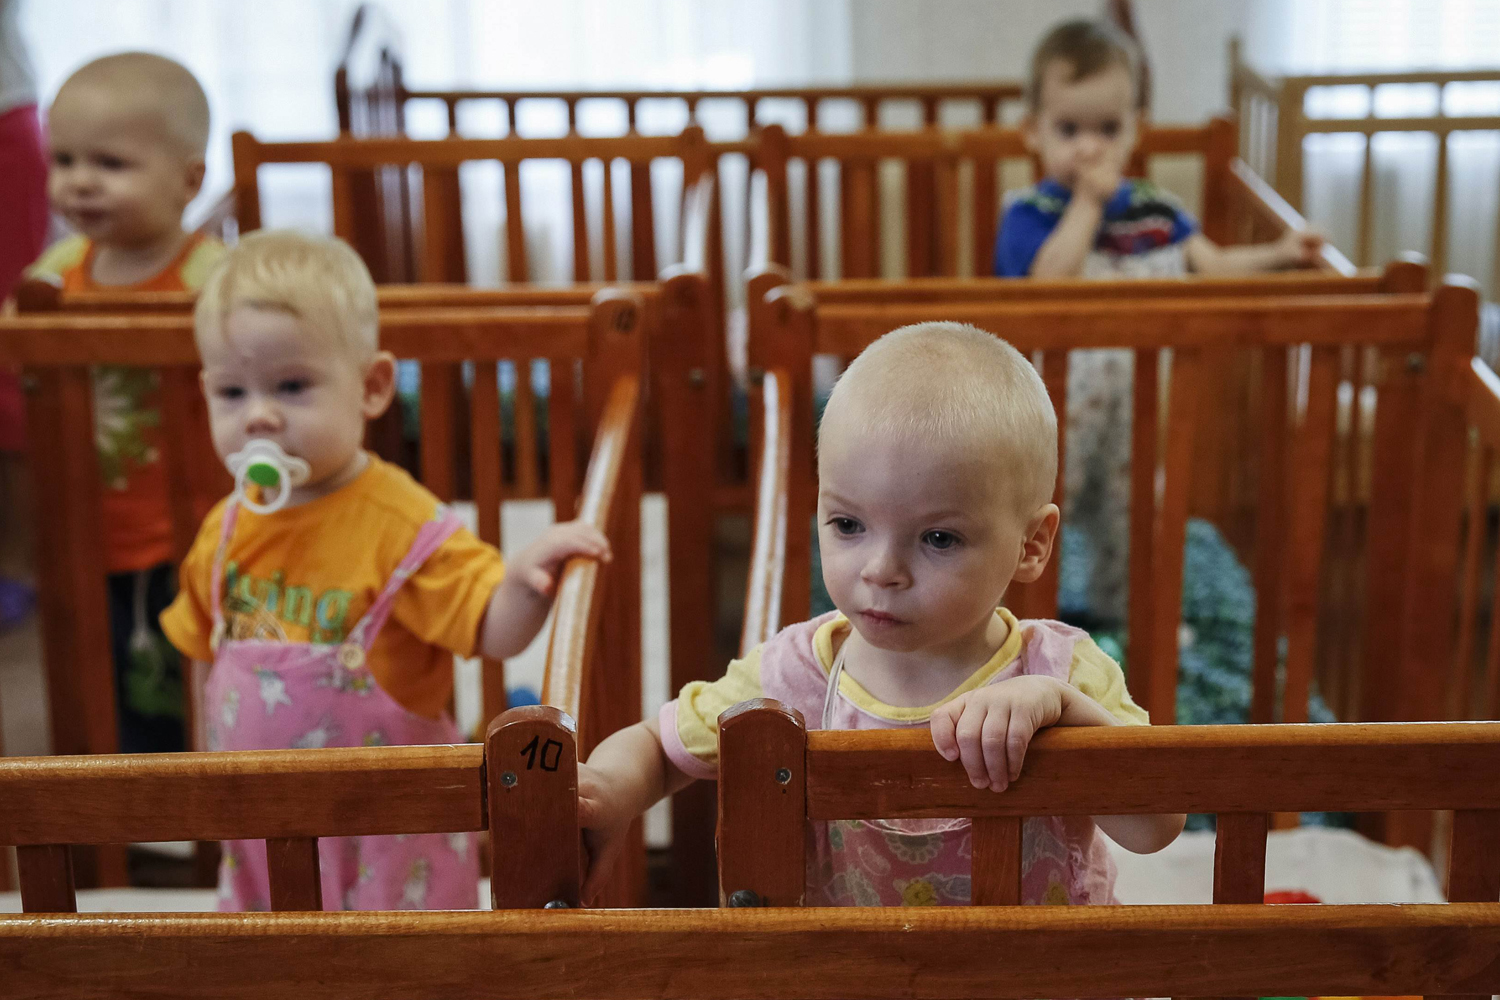 Children who were transferred from orphanages in Donetsk and Makeyevka stand in their cribs in an orphanage in Kramatorsk